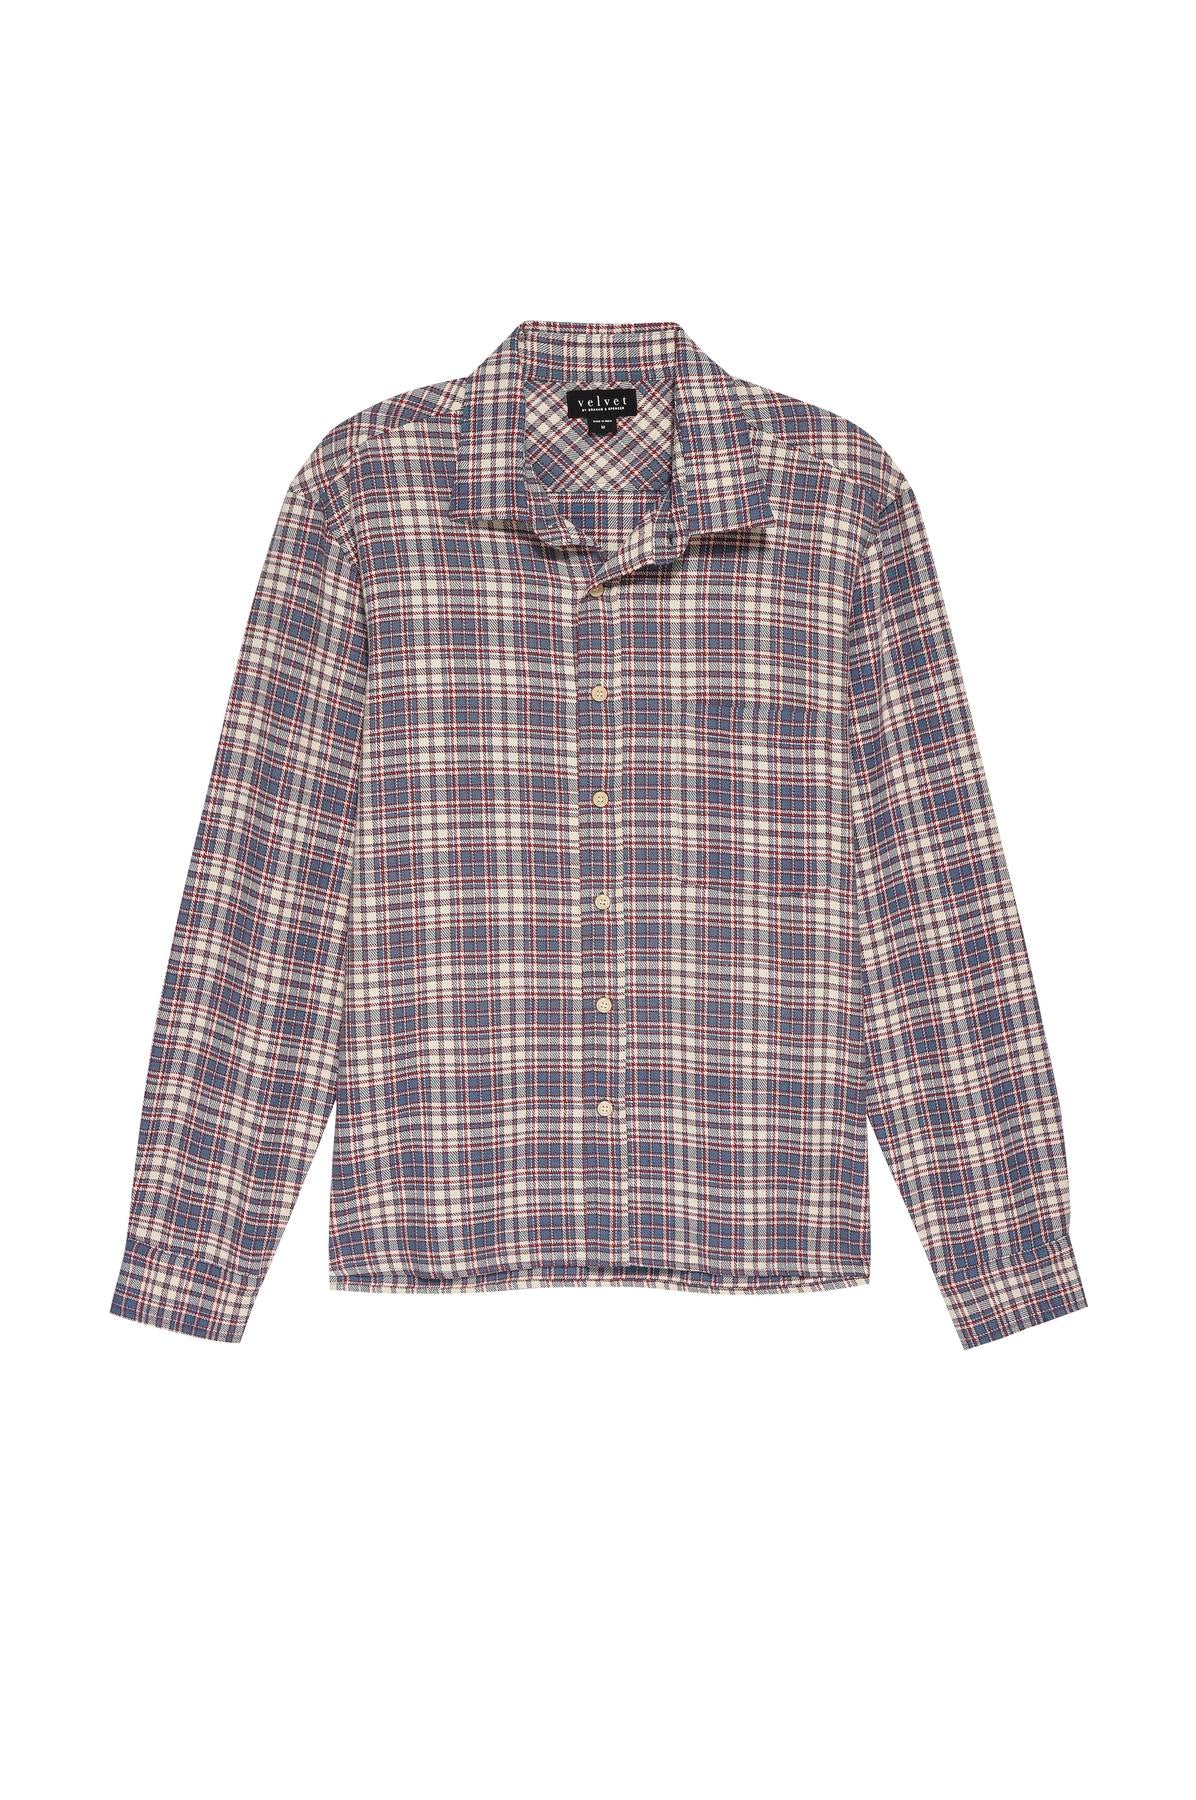   A Velvet by Graham & Spencer STAN PLAID BUTTON-UP SHIRT with a collar and cuffs. 